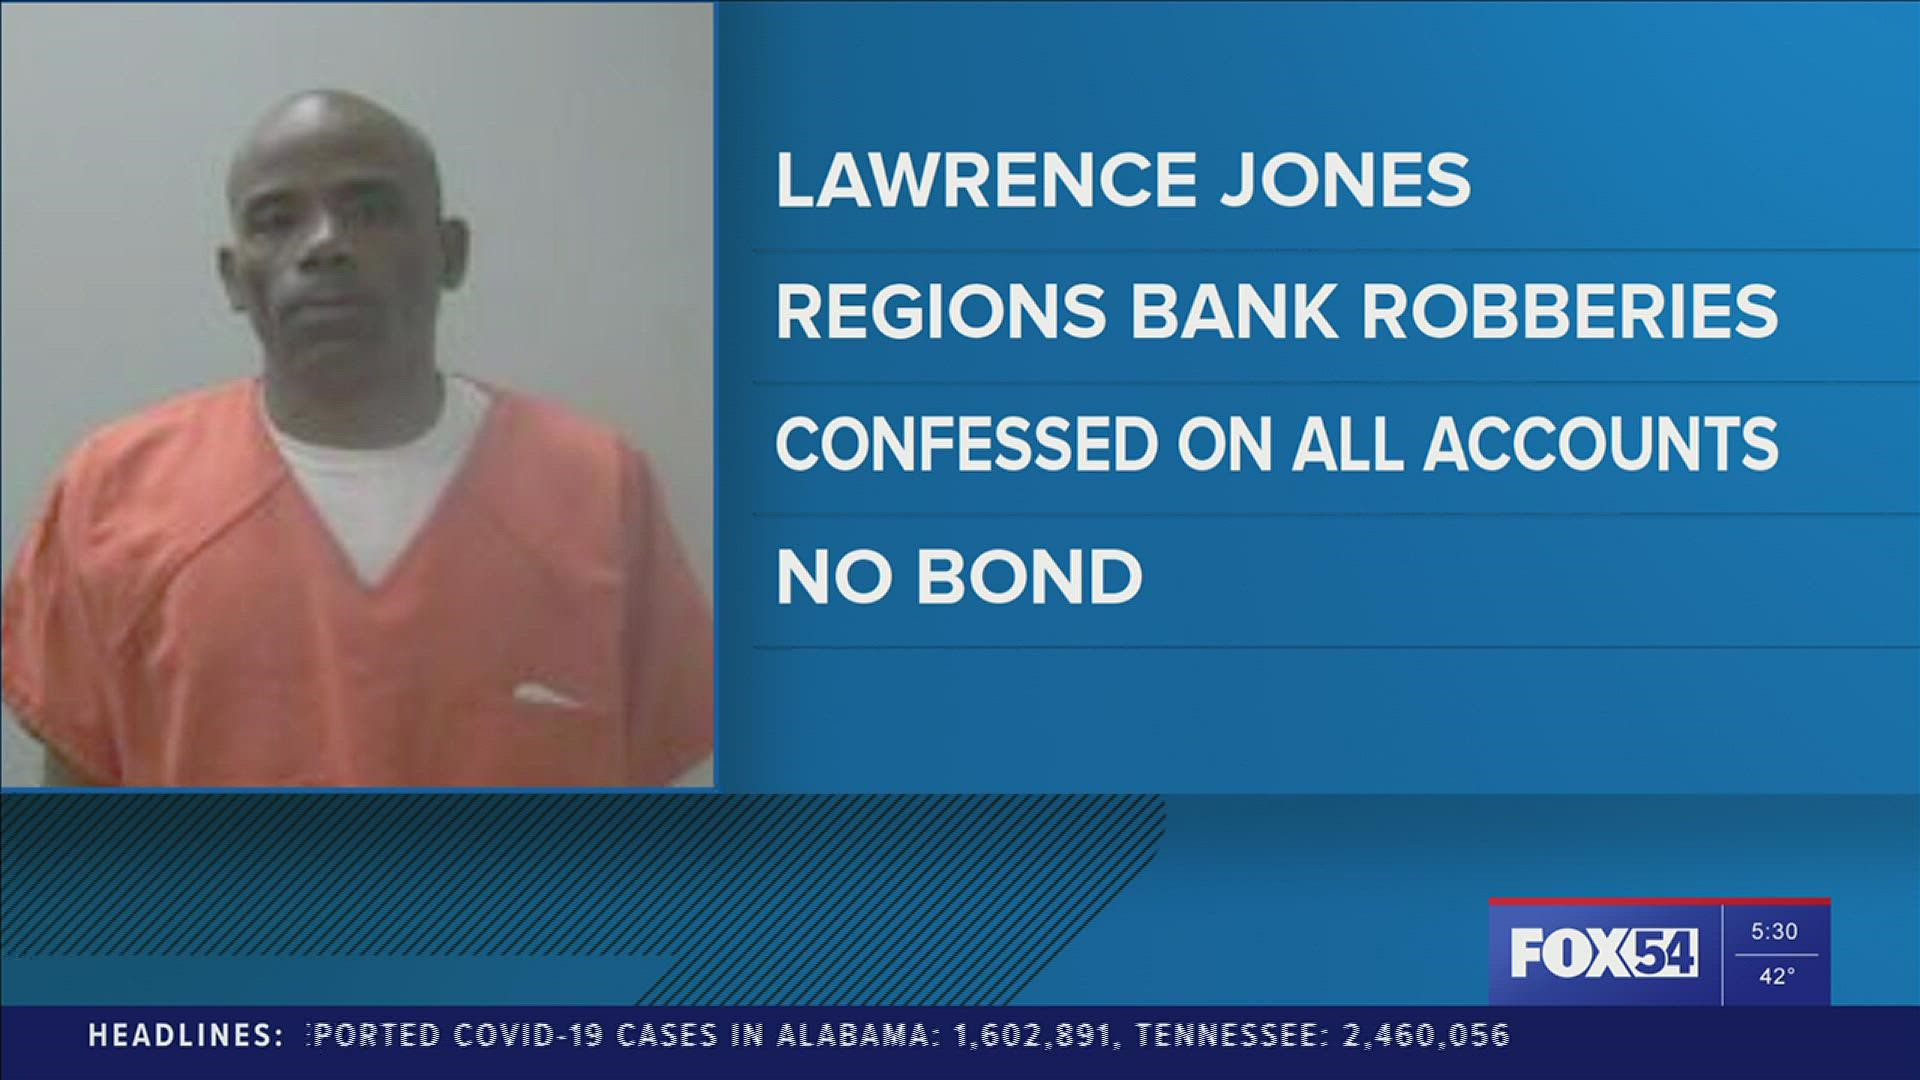 Lawrence Jones confessed to three bank robberies across Madison and Huntsville.